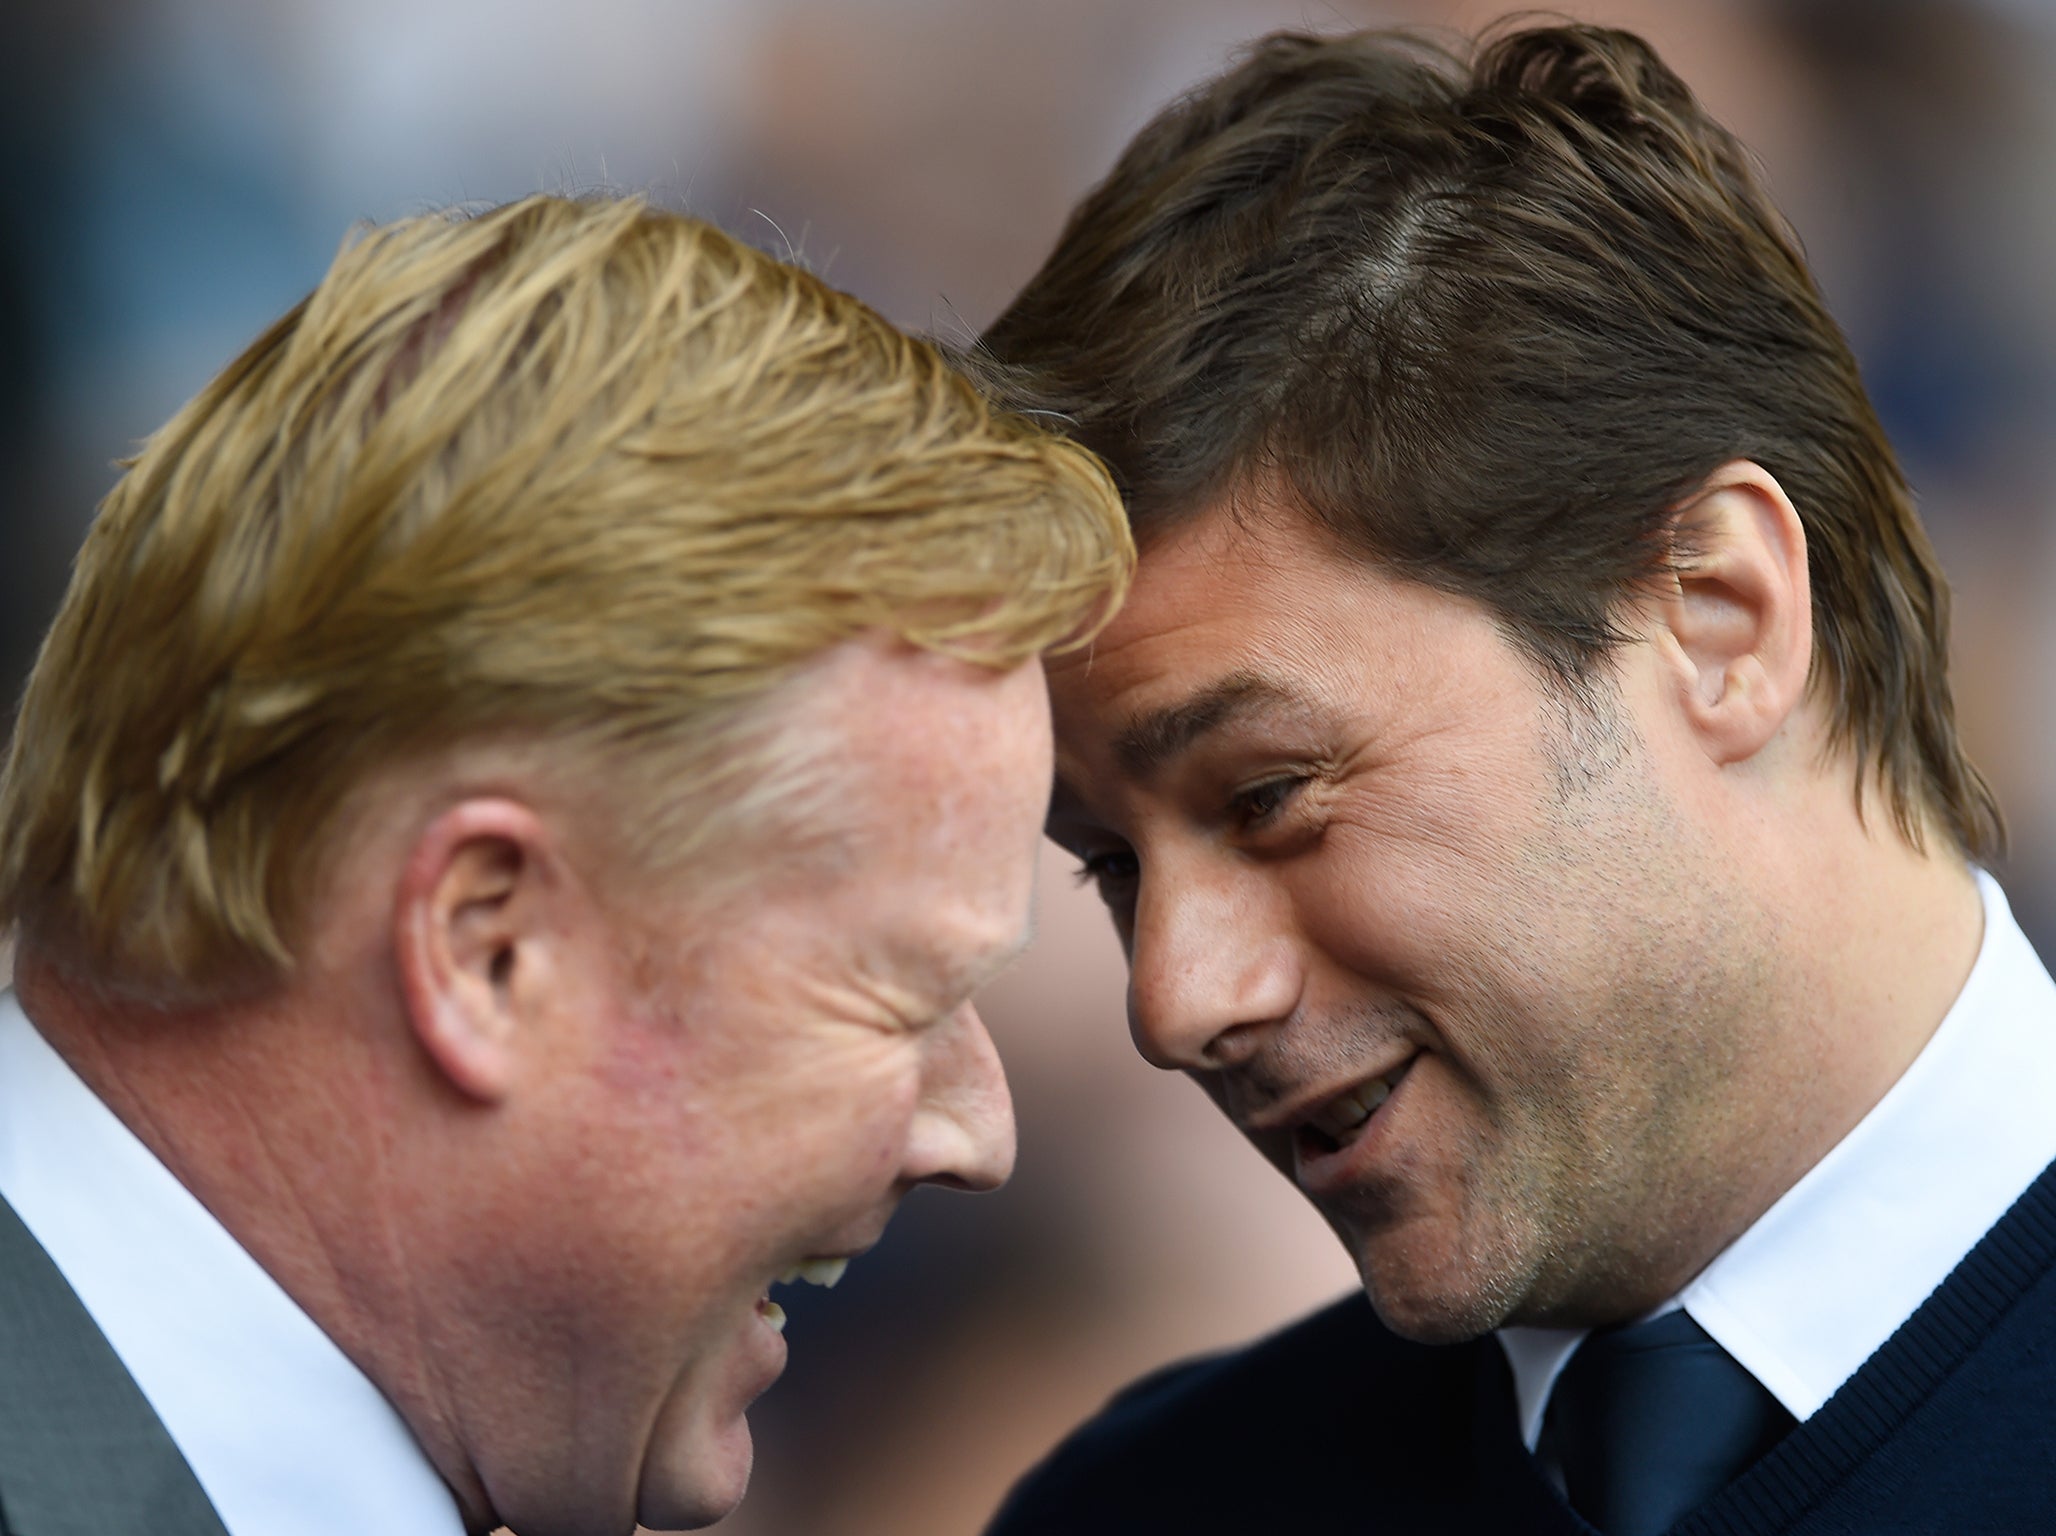 Everton and Spurs have both won four points from their opening three games